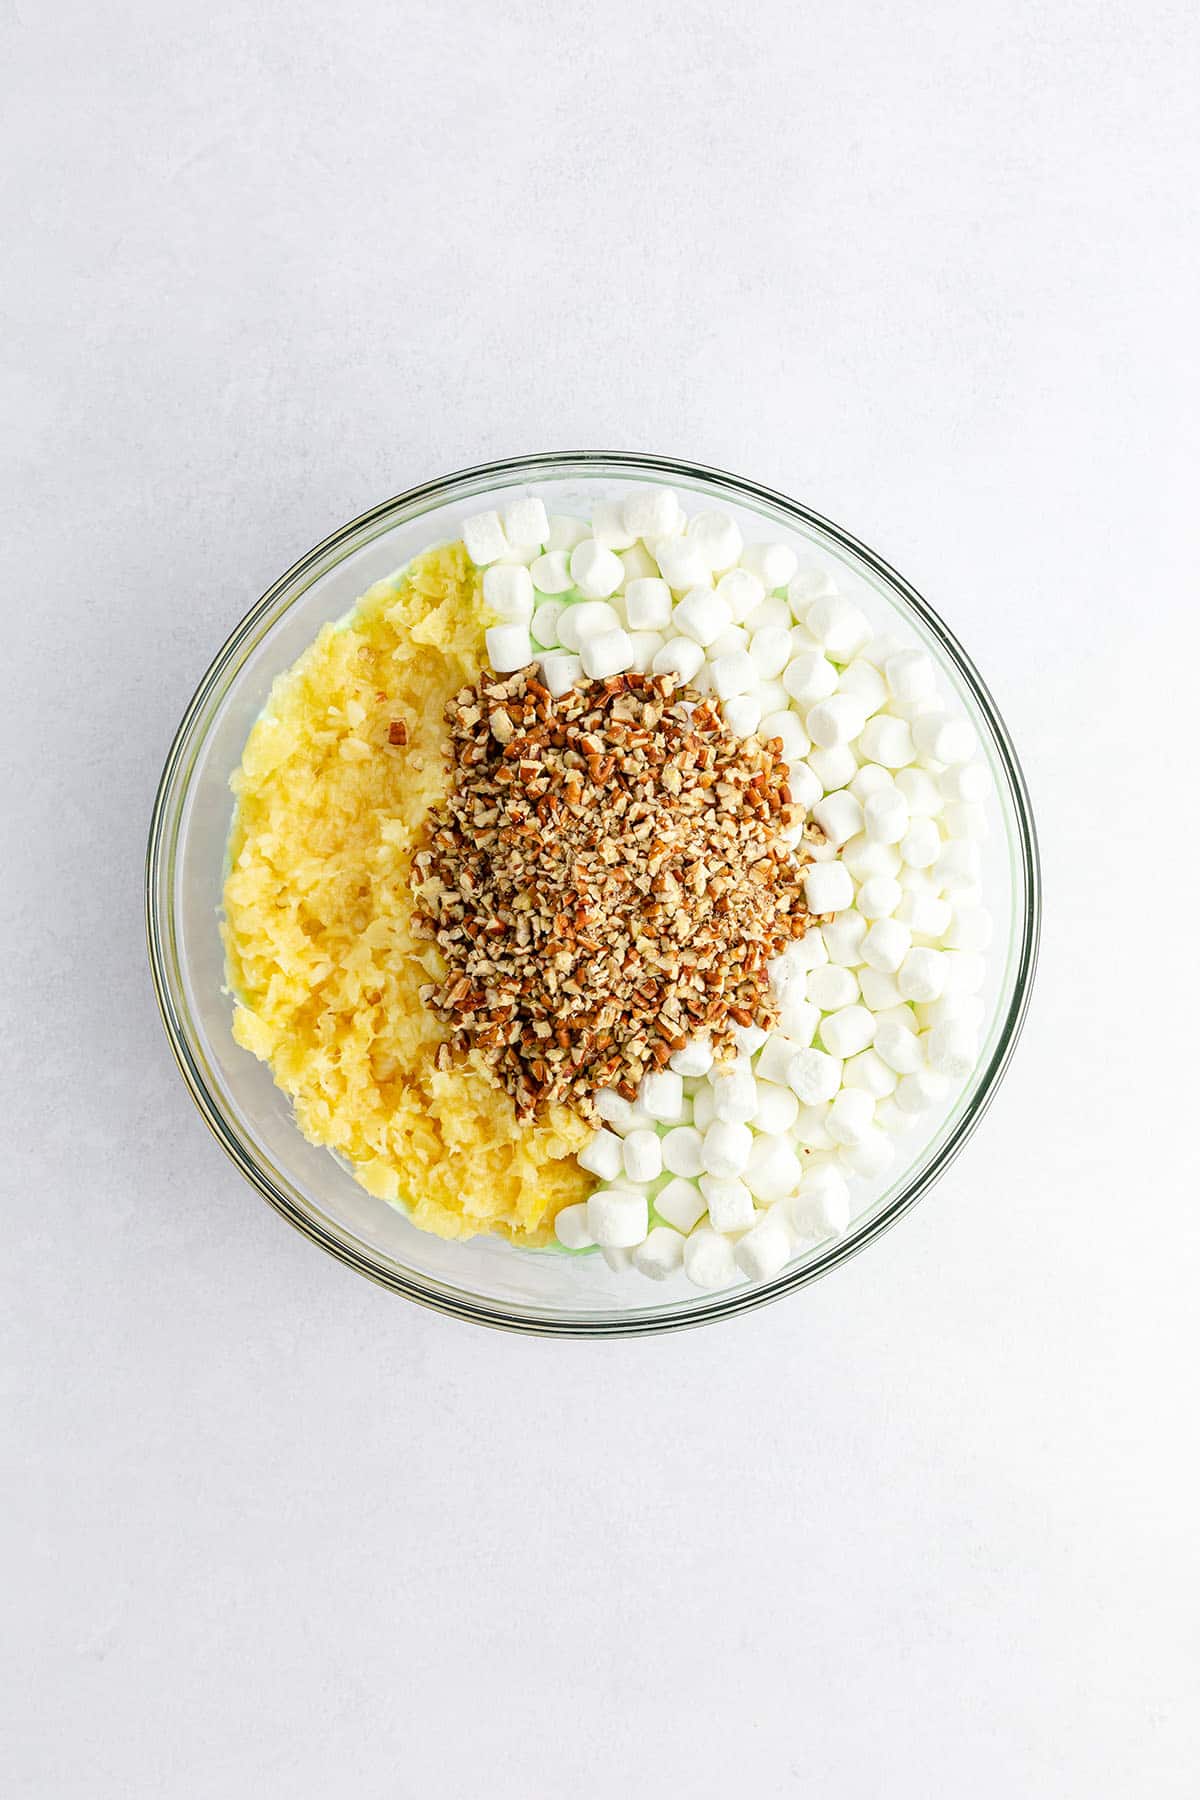 White mallows, chopped pecans, and crushed pineapple are arranged artfully in a glass bowl